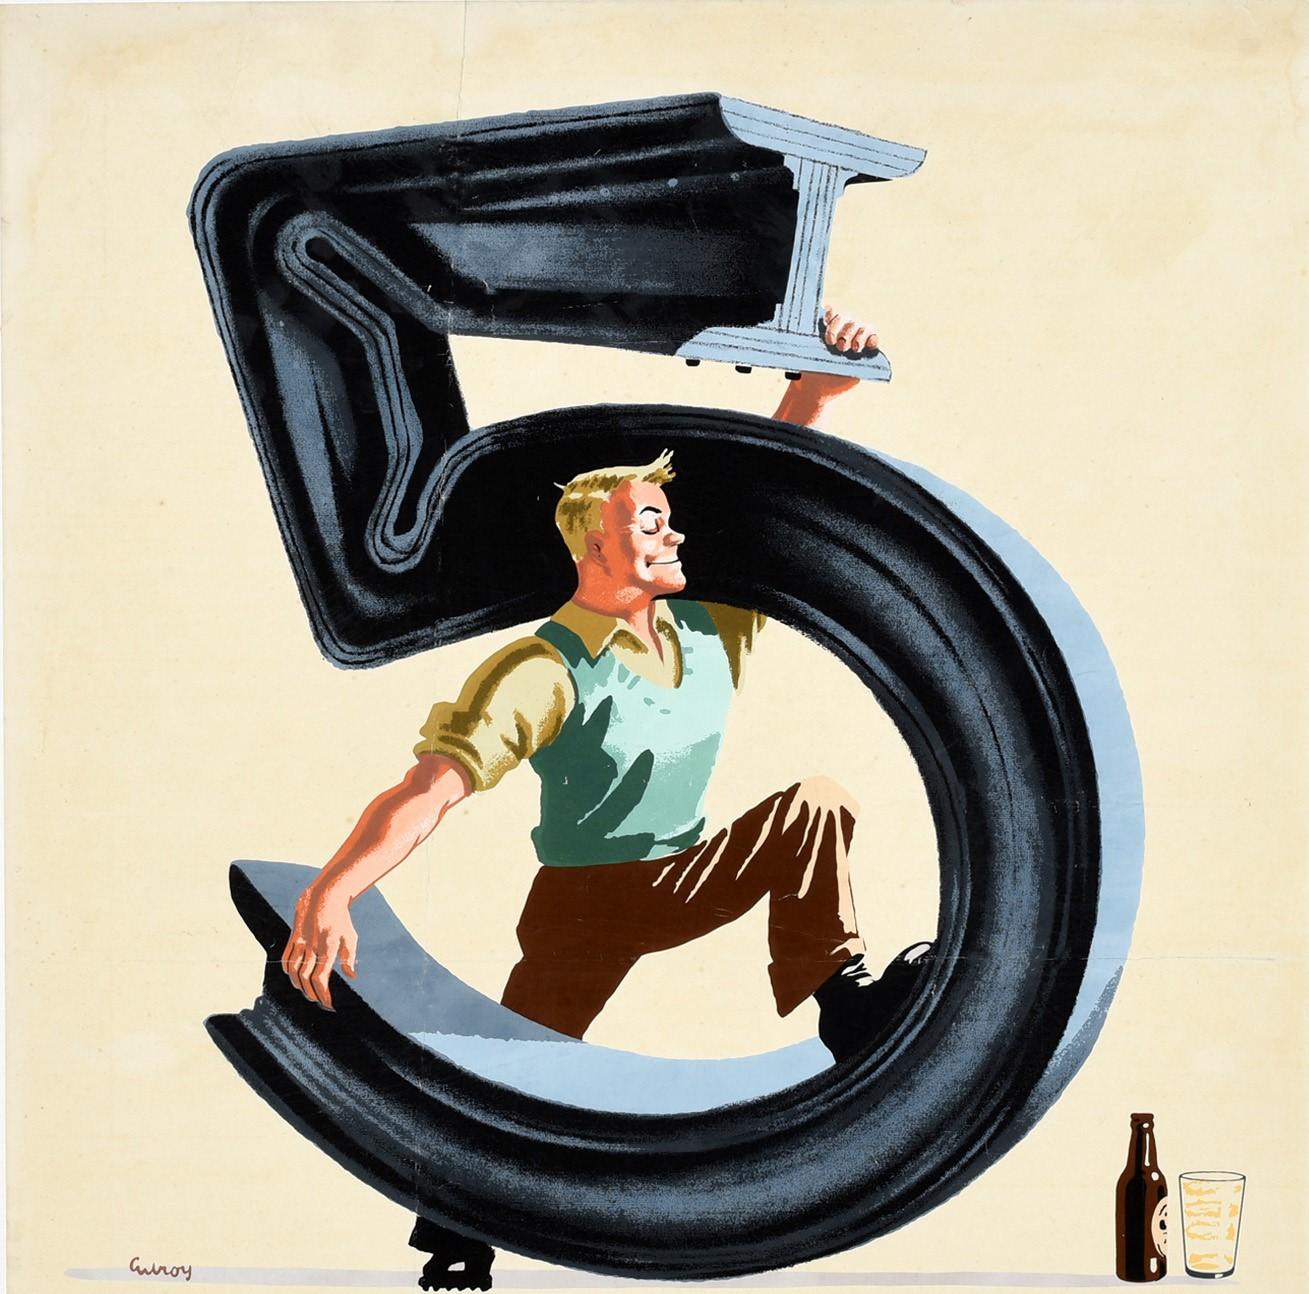 Original vintage advertising poster for the iconic drink Guinness Irish stout beer - 5 Million Guinness for strength every day - featuring a smiling man bending a metal girder into the shape of the number five with ease, holding it with both arms